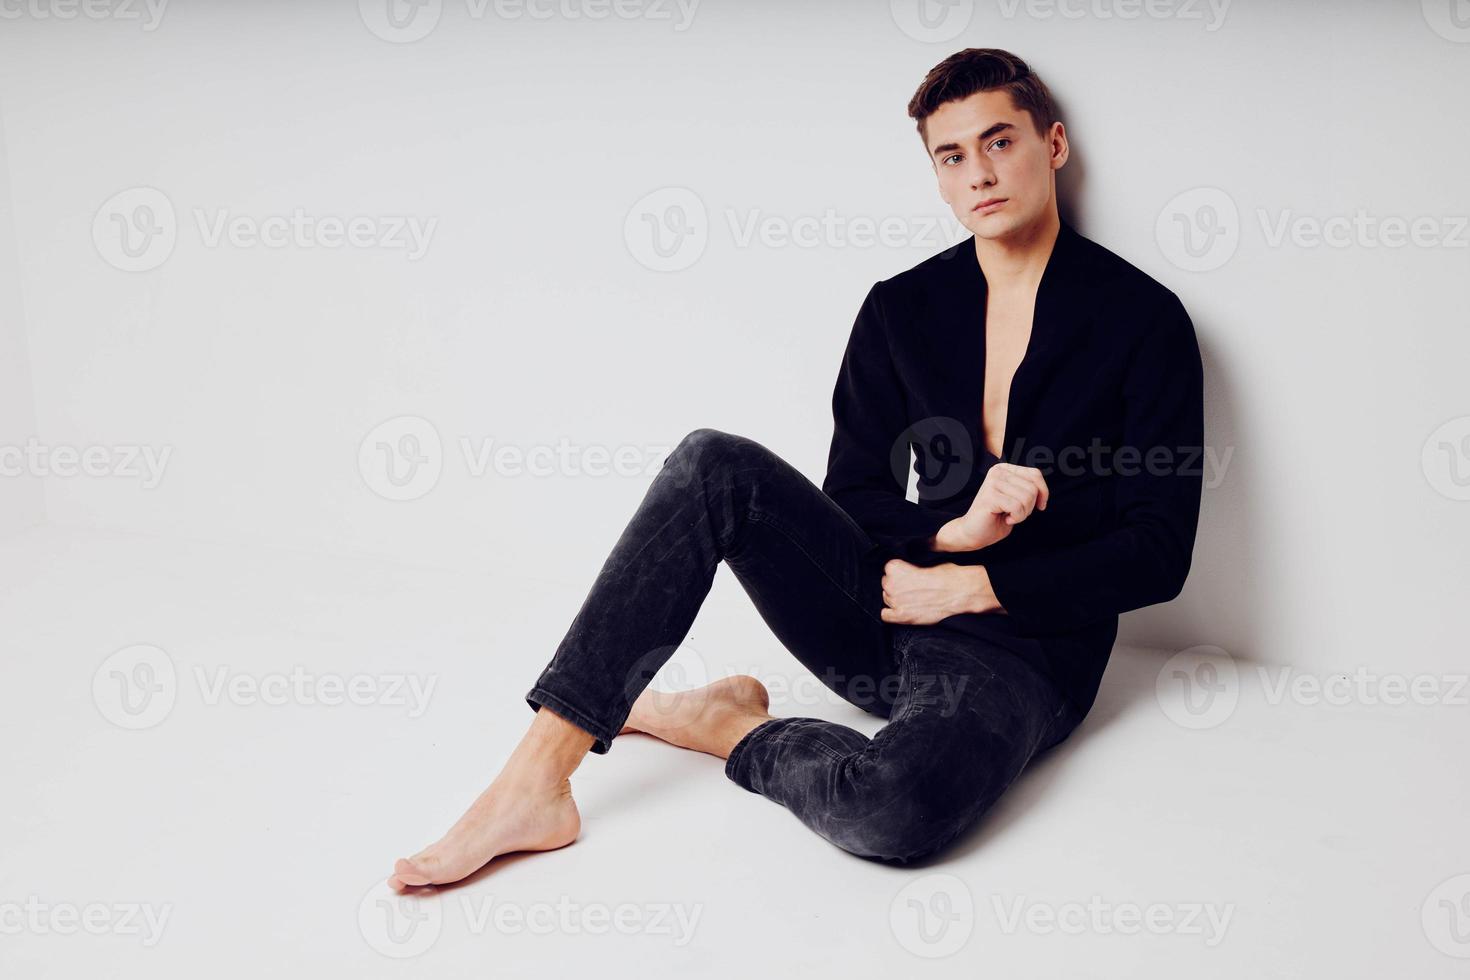 A handsome man is sitting on the floor in a black modern style jacket photo